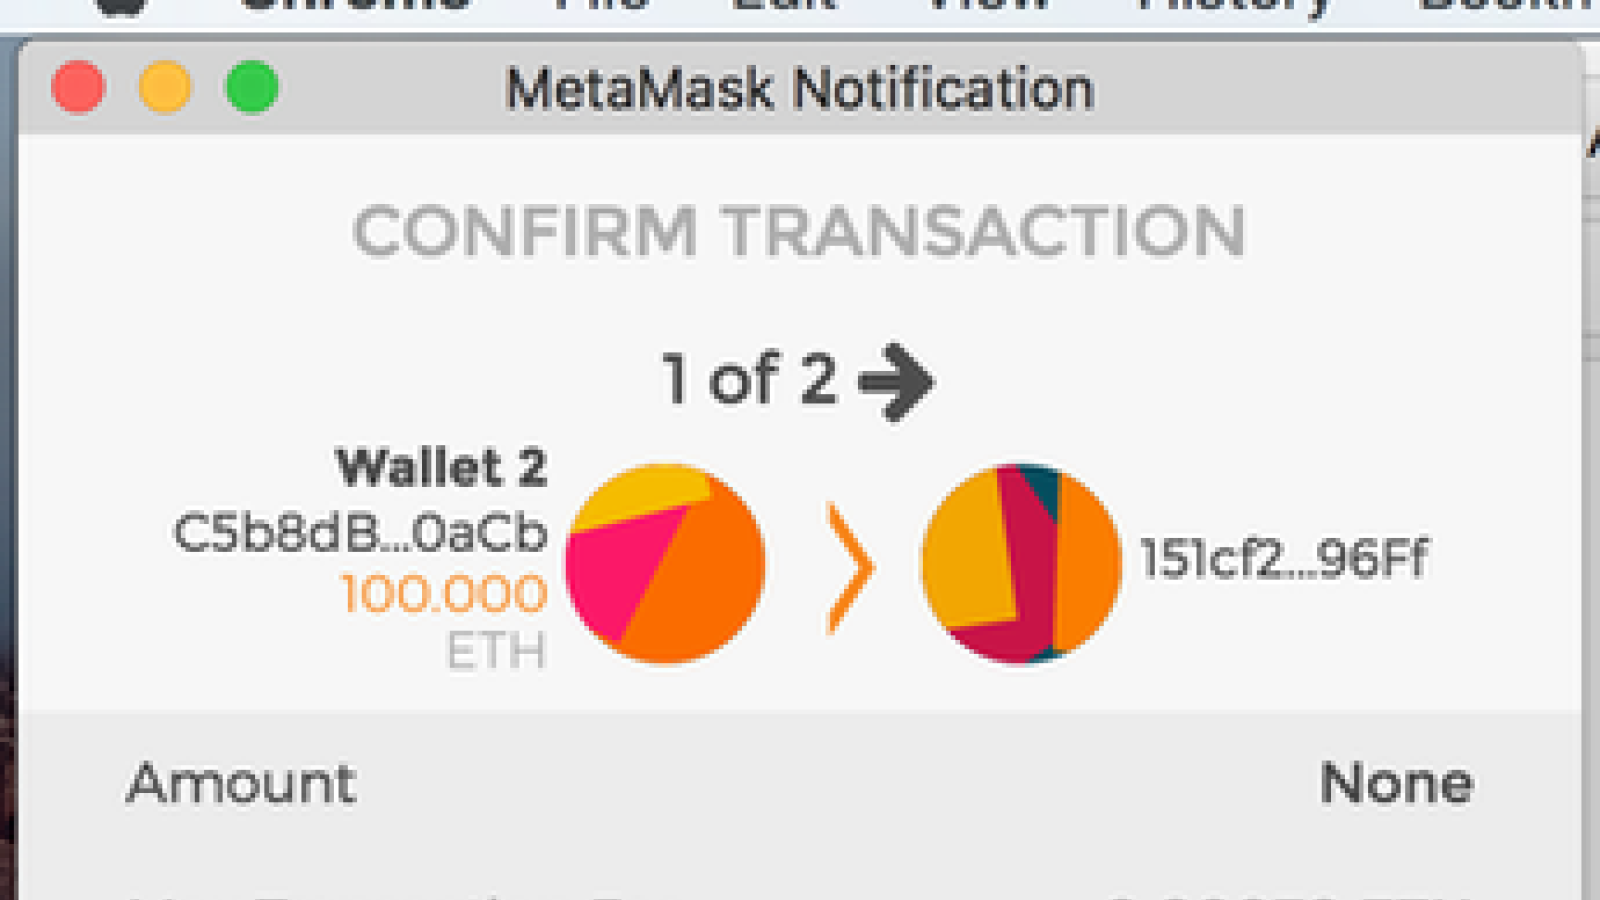 MetaMask window for transaction confirmation